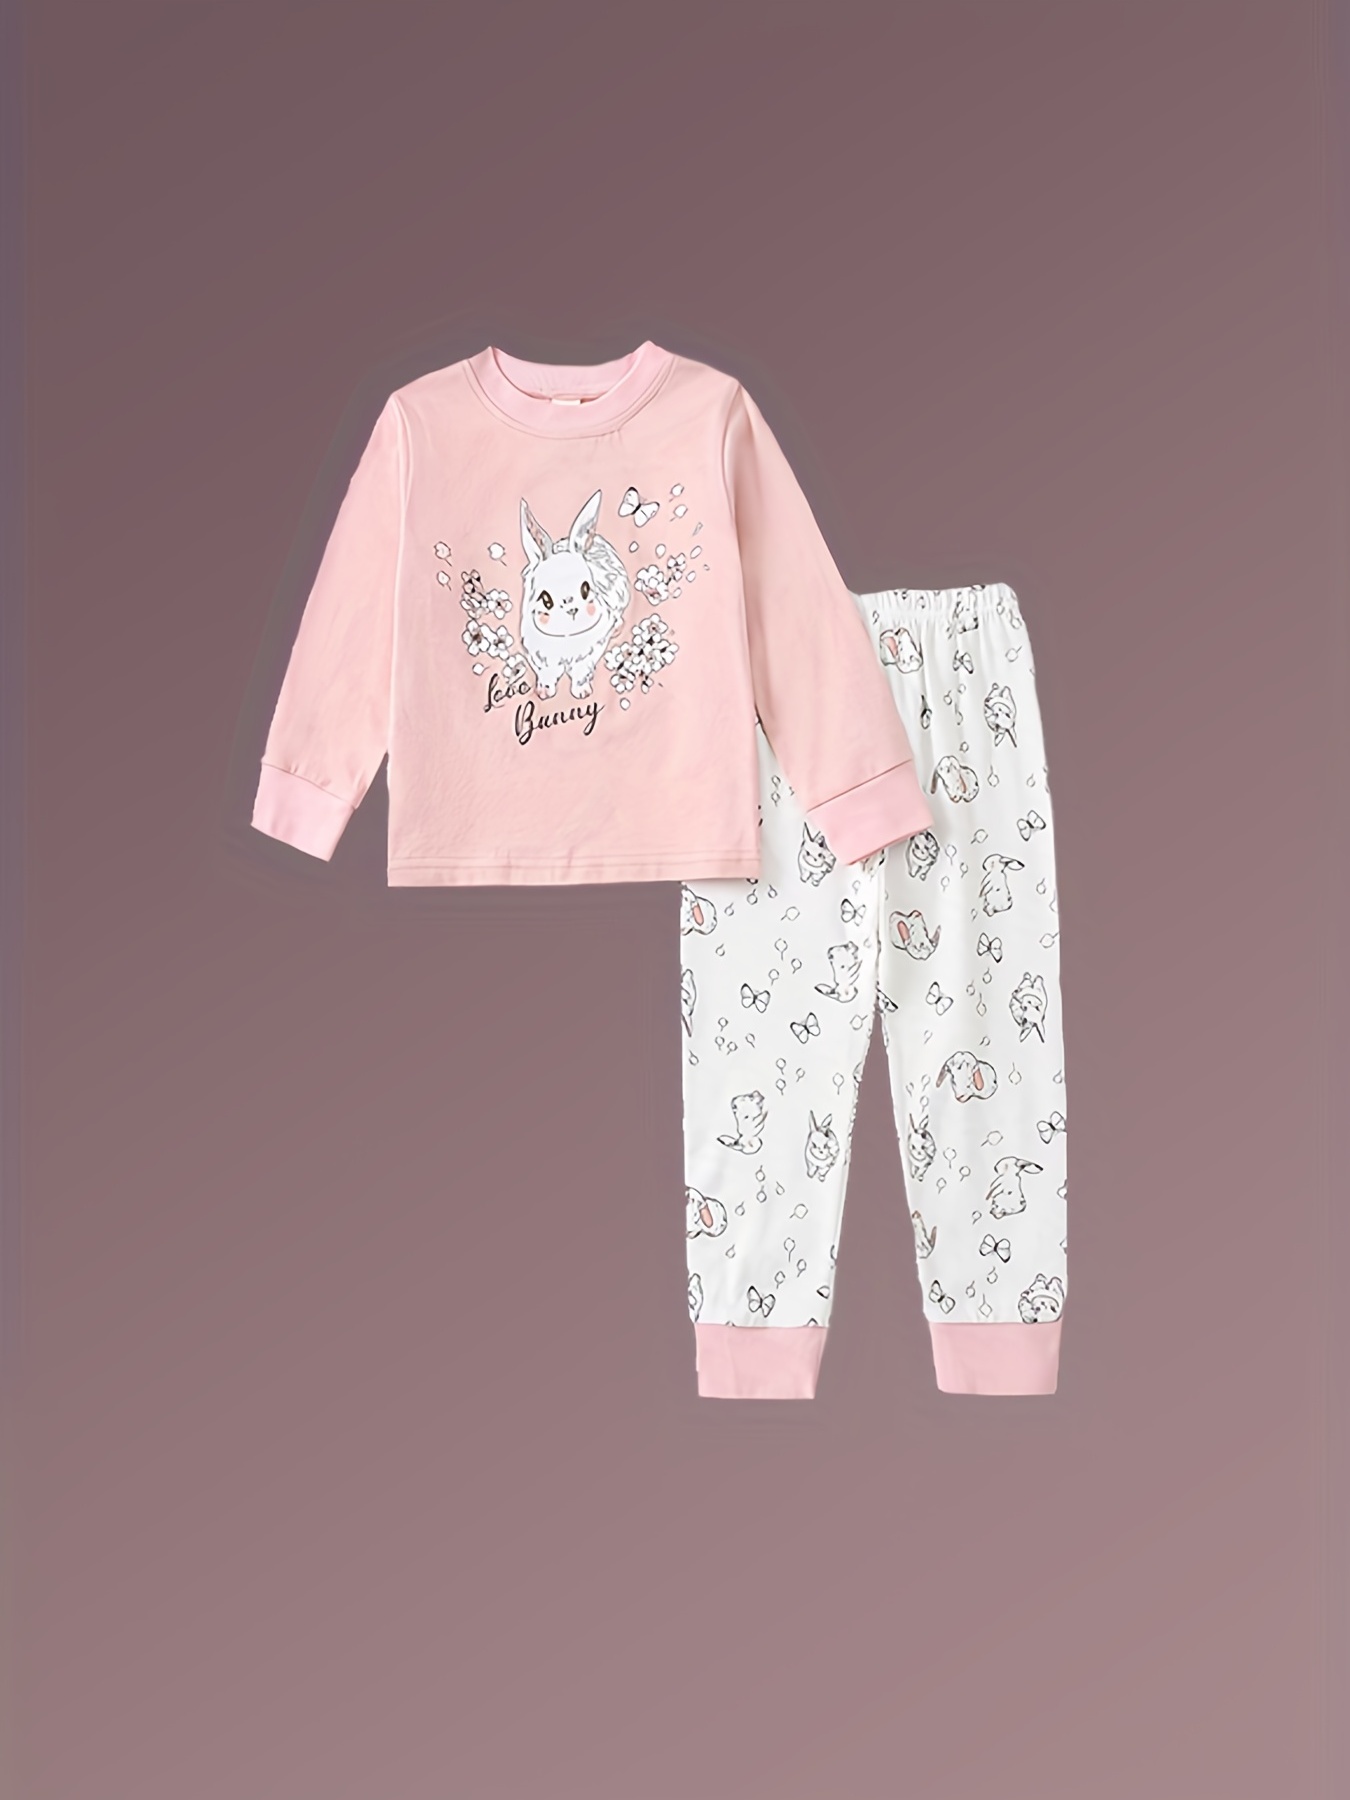 Toddler Girls Cute Deer Overall Floral Print Pajama Set Long Sleeve Crew  Neck Comfy Loungewear For All Seasons